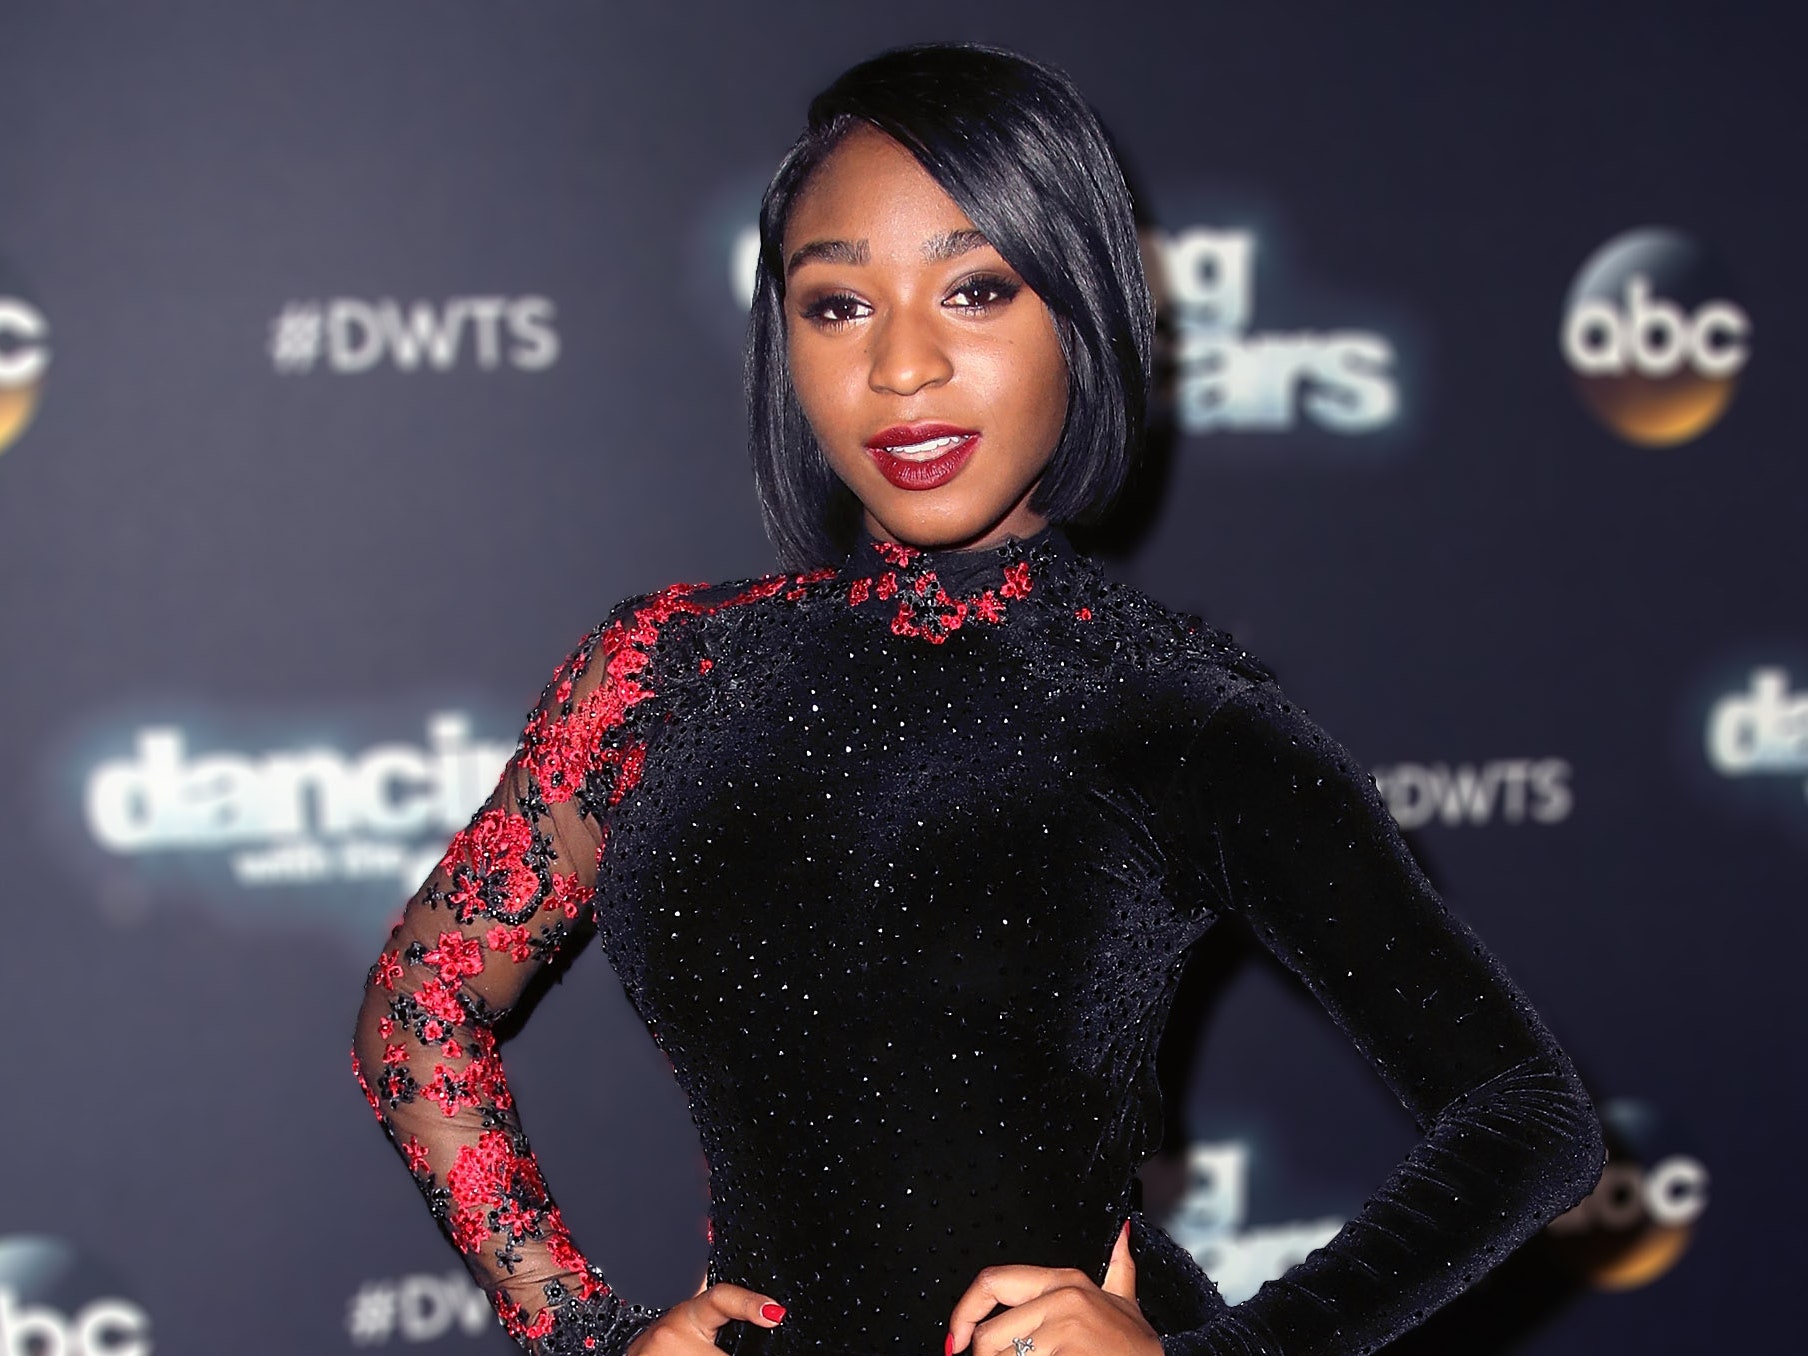 Normani Kordei Annouced to Quit from Twitter Due to Racism